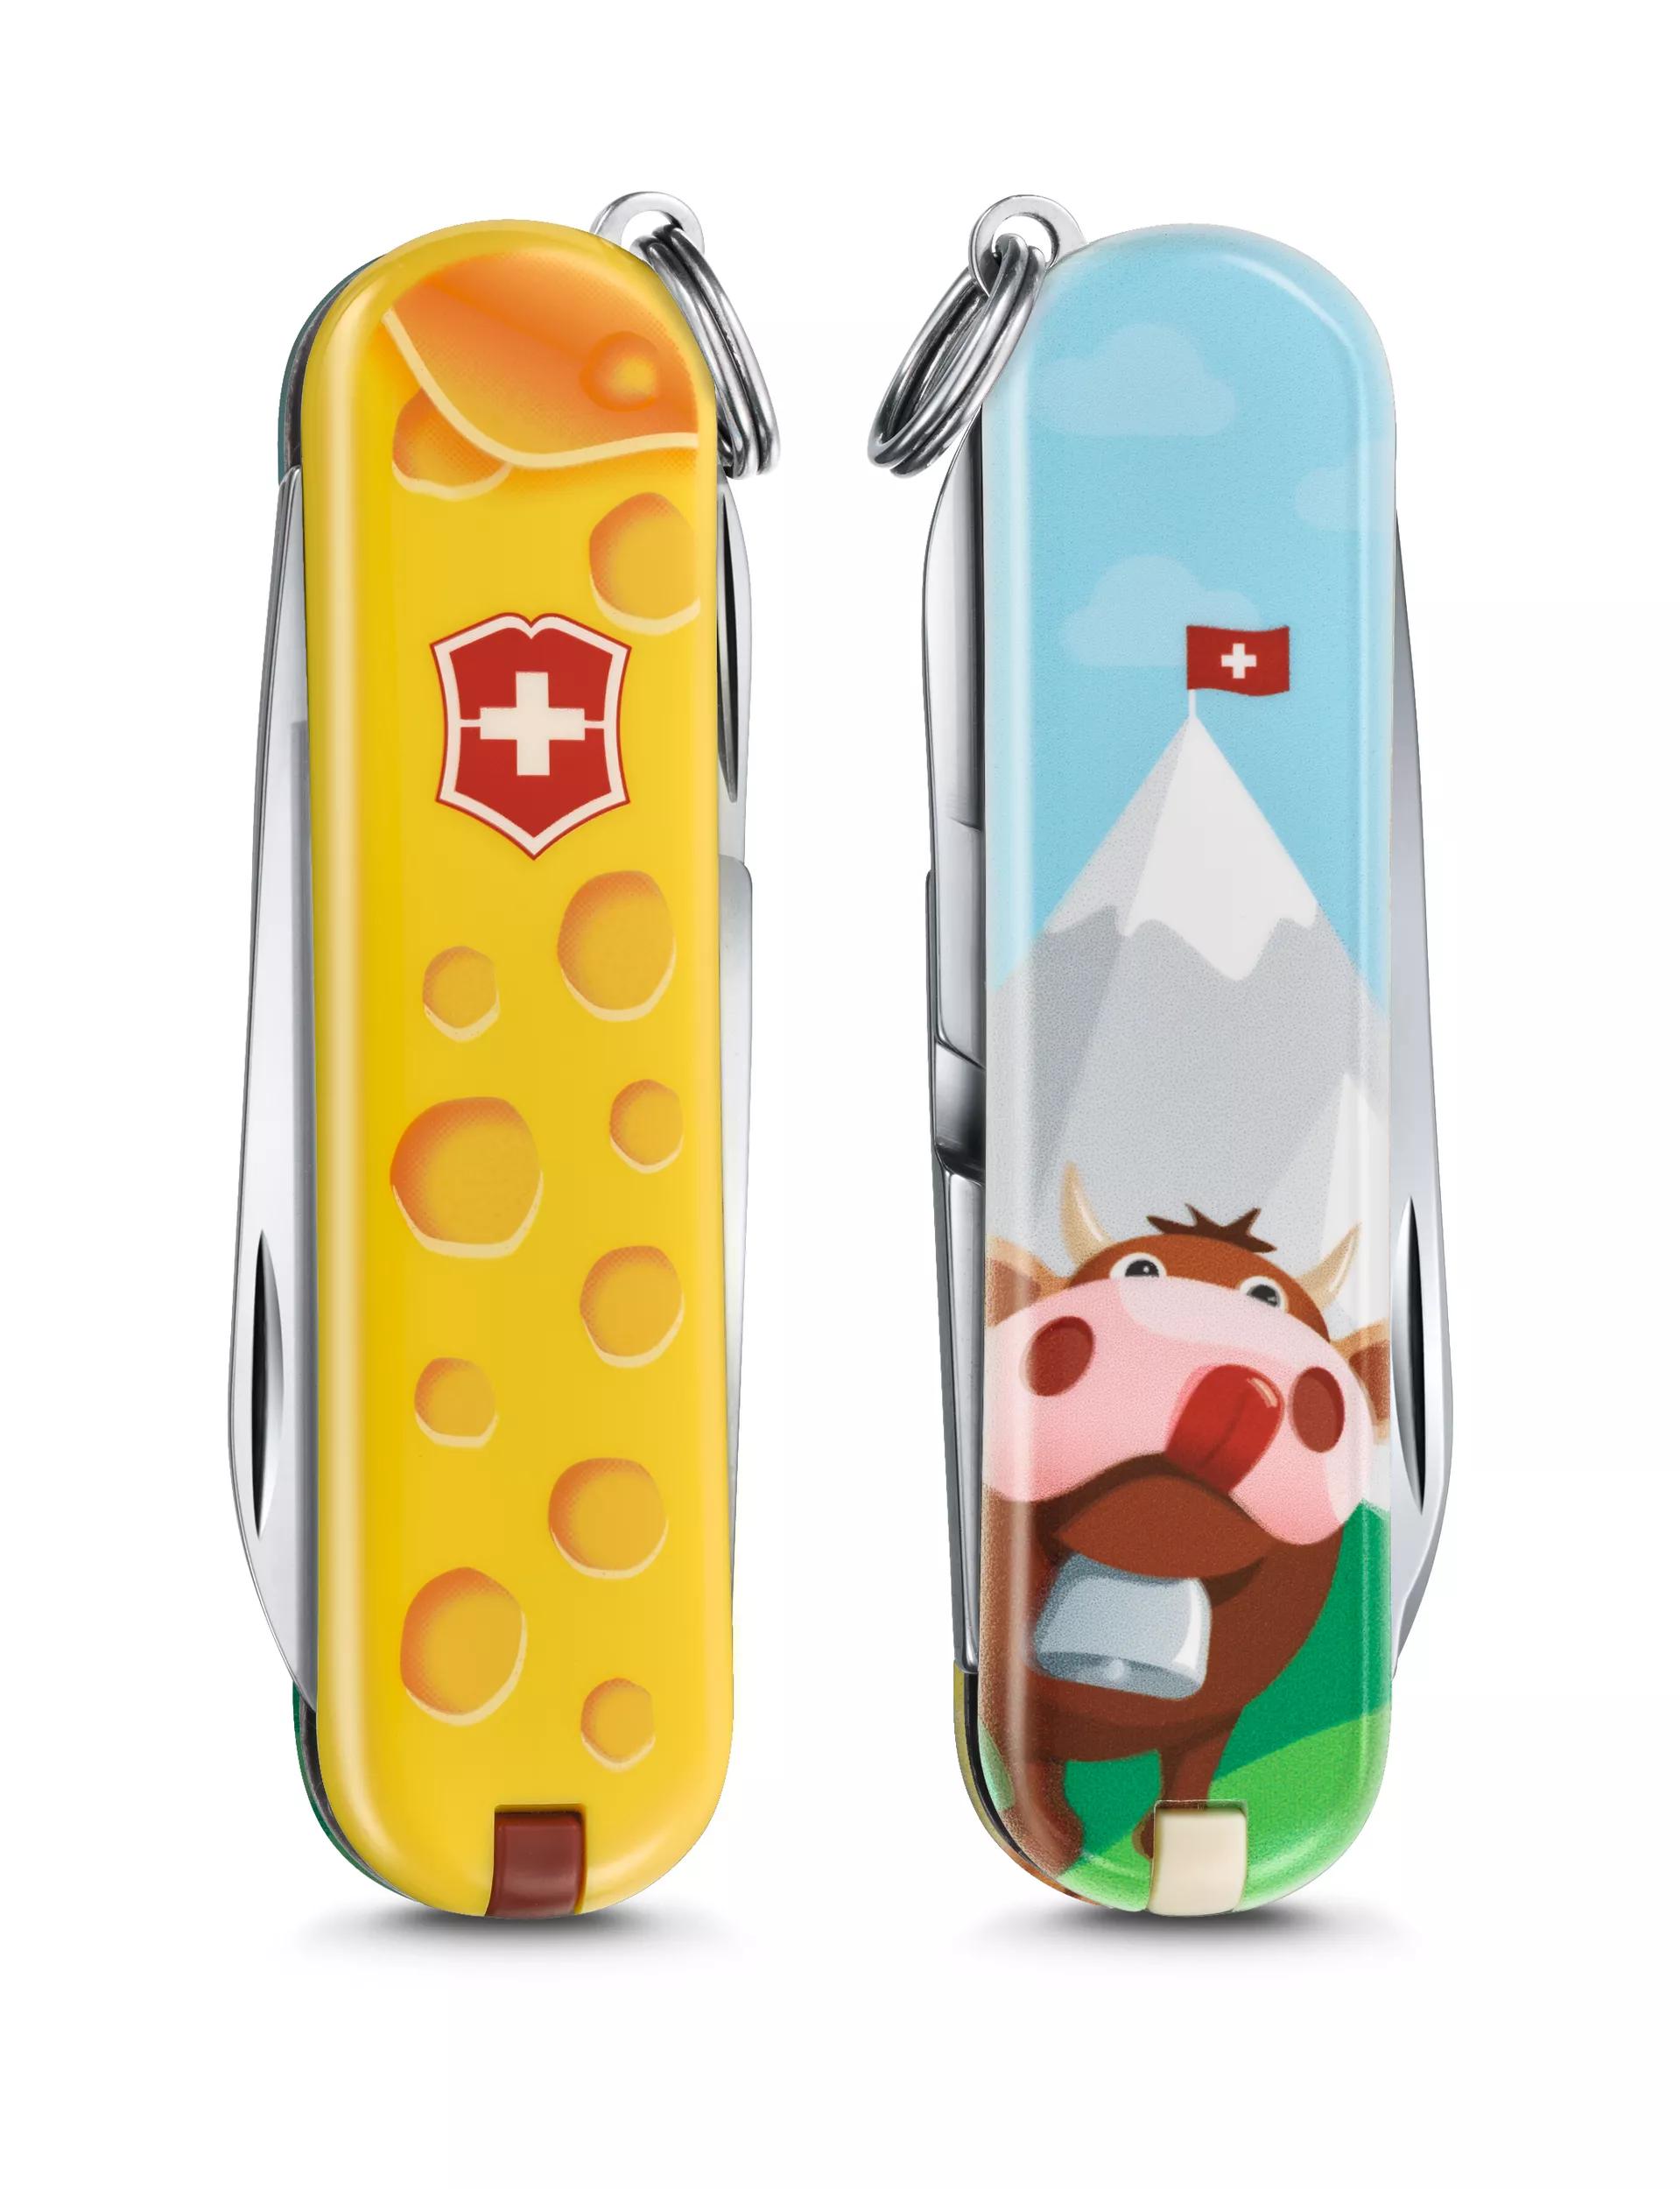 Victorinox Classic Limited Edition 2019 in Alps Cheese - 0.6223.L1902